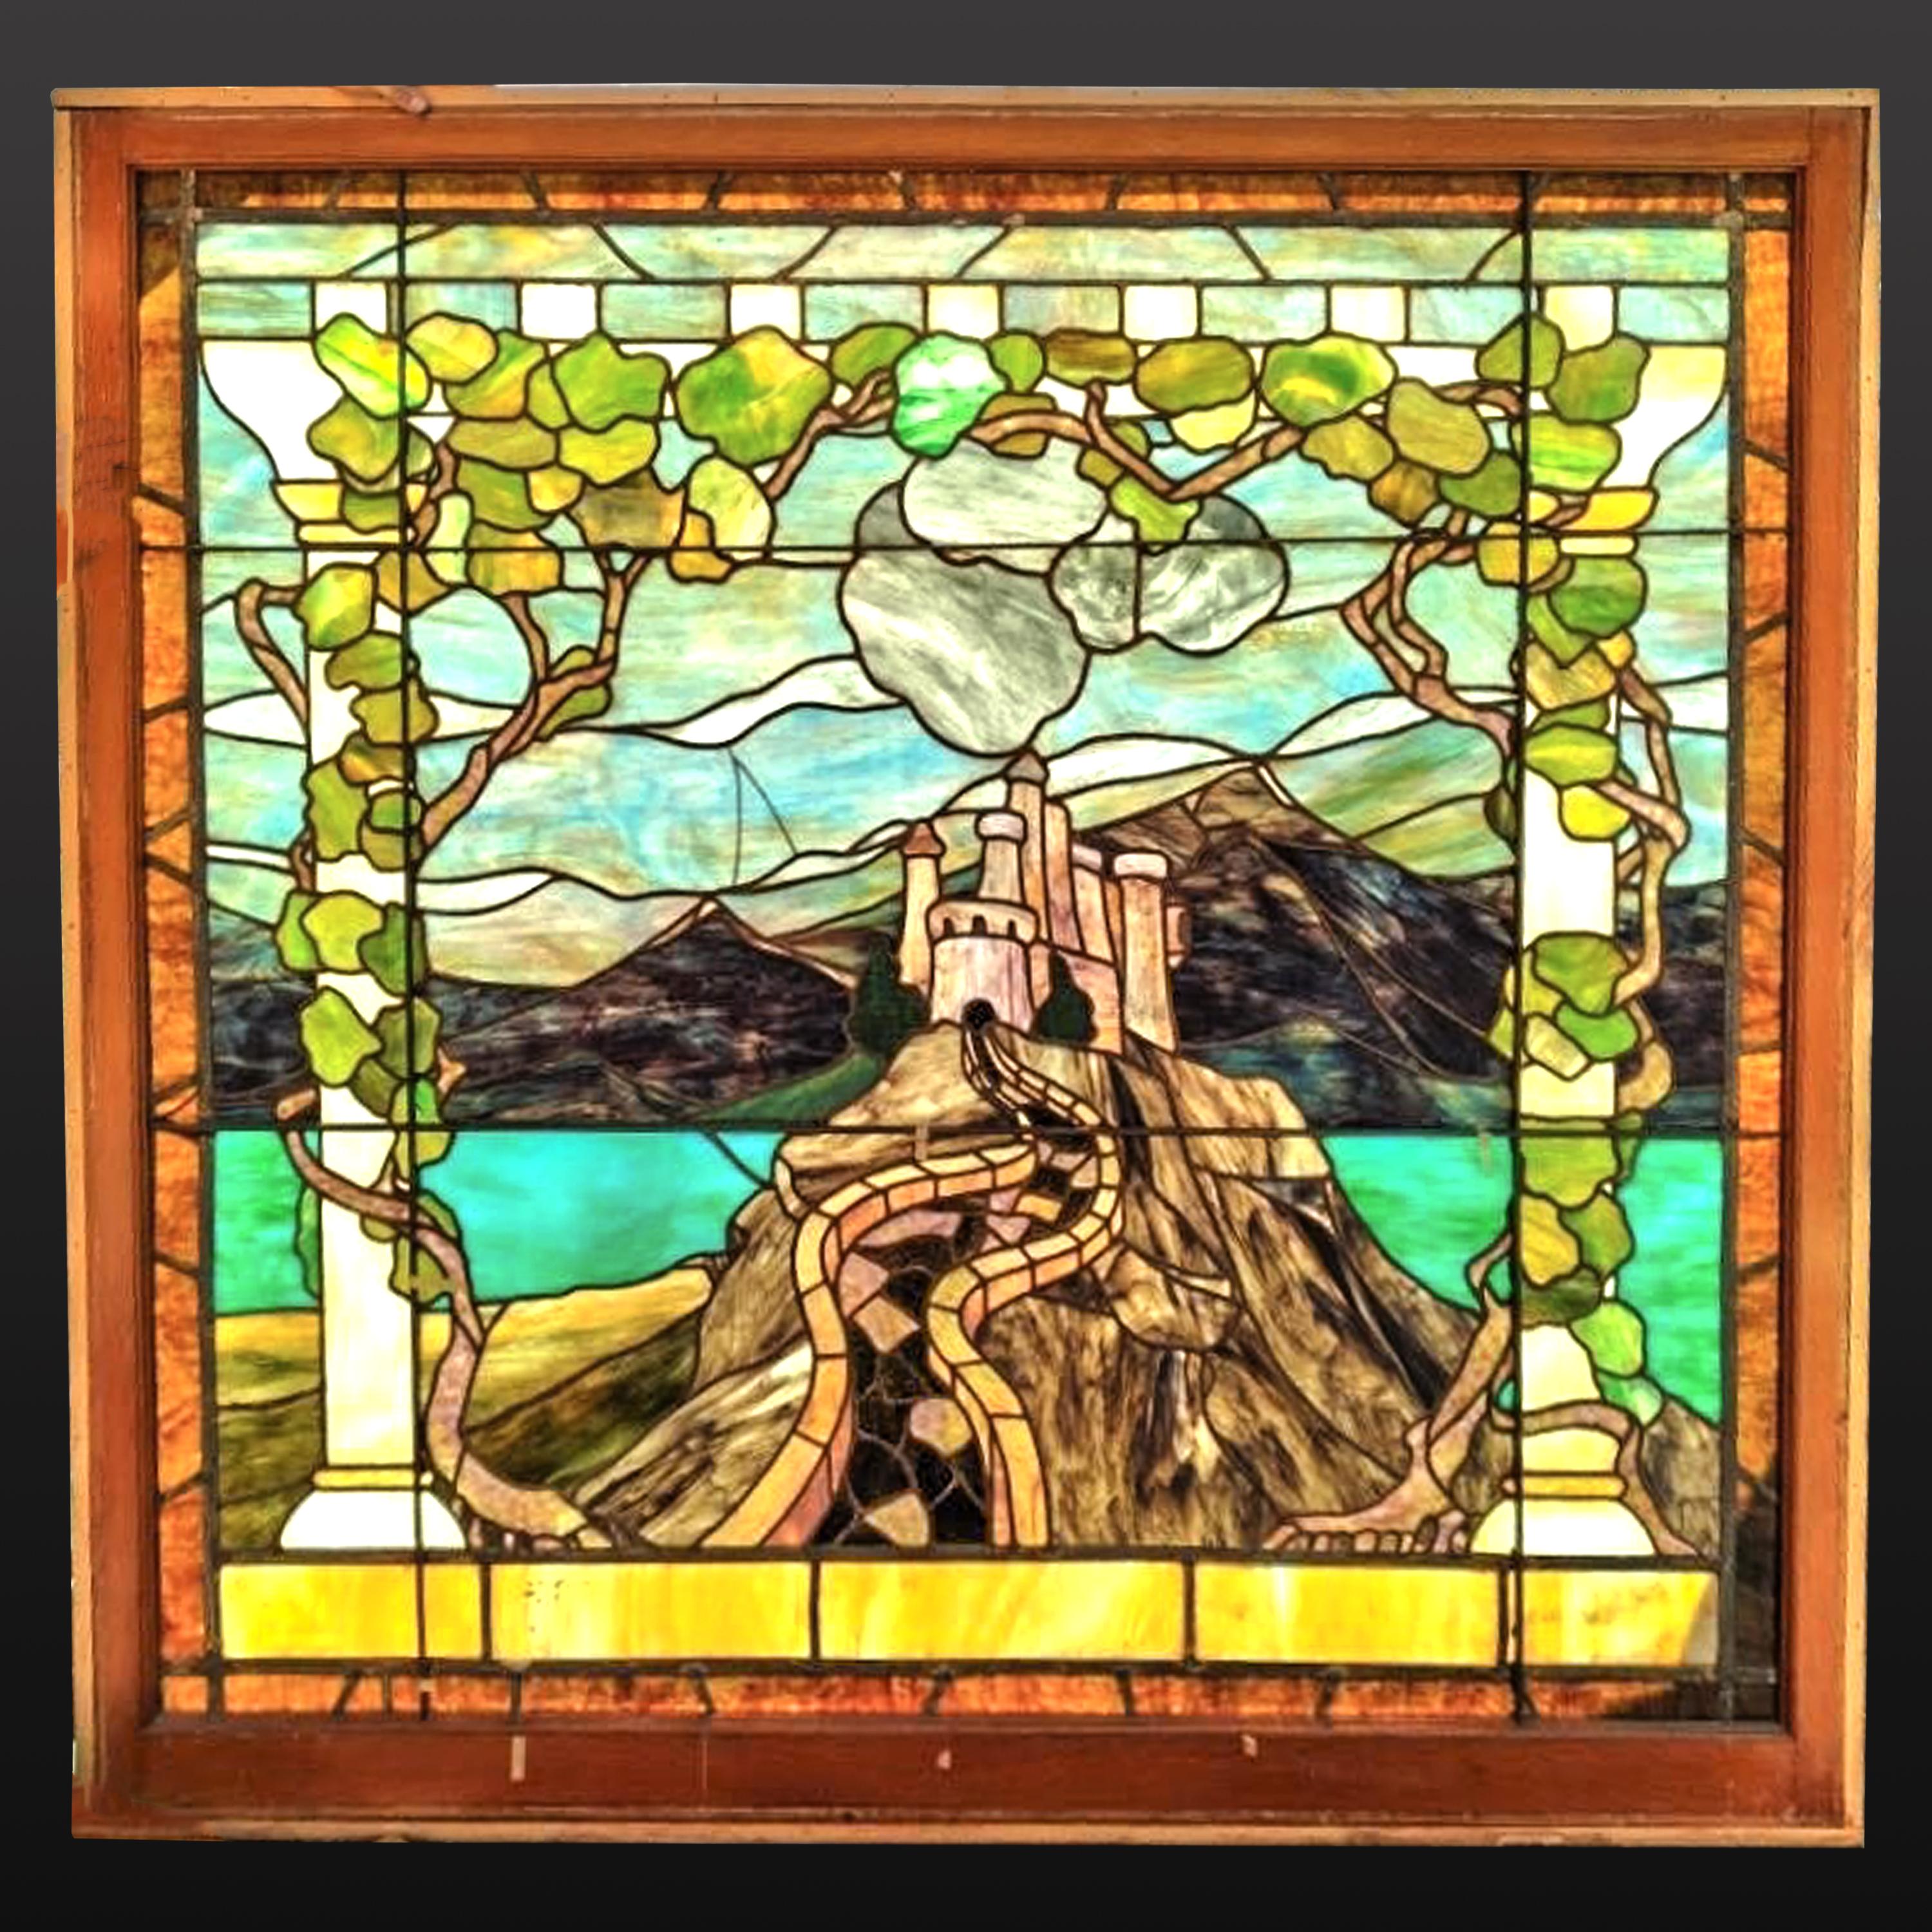 A highly important monumental American Arts & Crafts landscape window, attributed to Tiffany & Co, New York, Circa 1910.
The window having a border with textured gold tone tiles, the background is composed of variegated blue glass, with a mountain